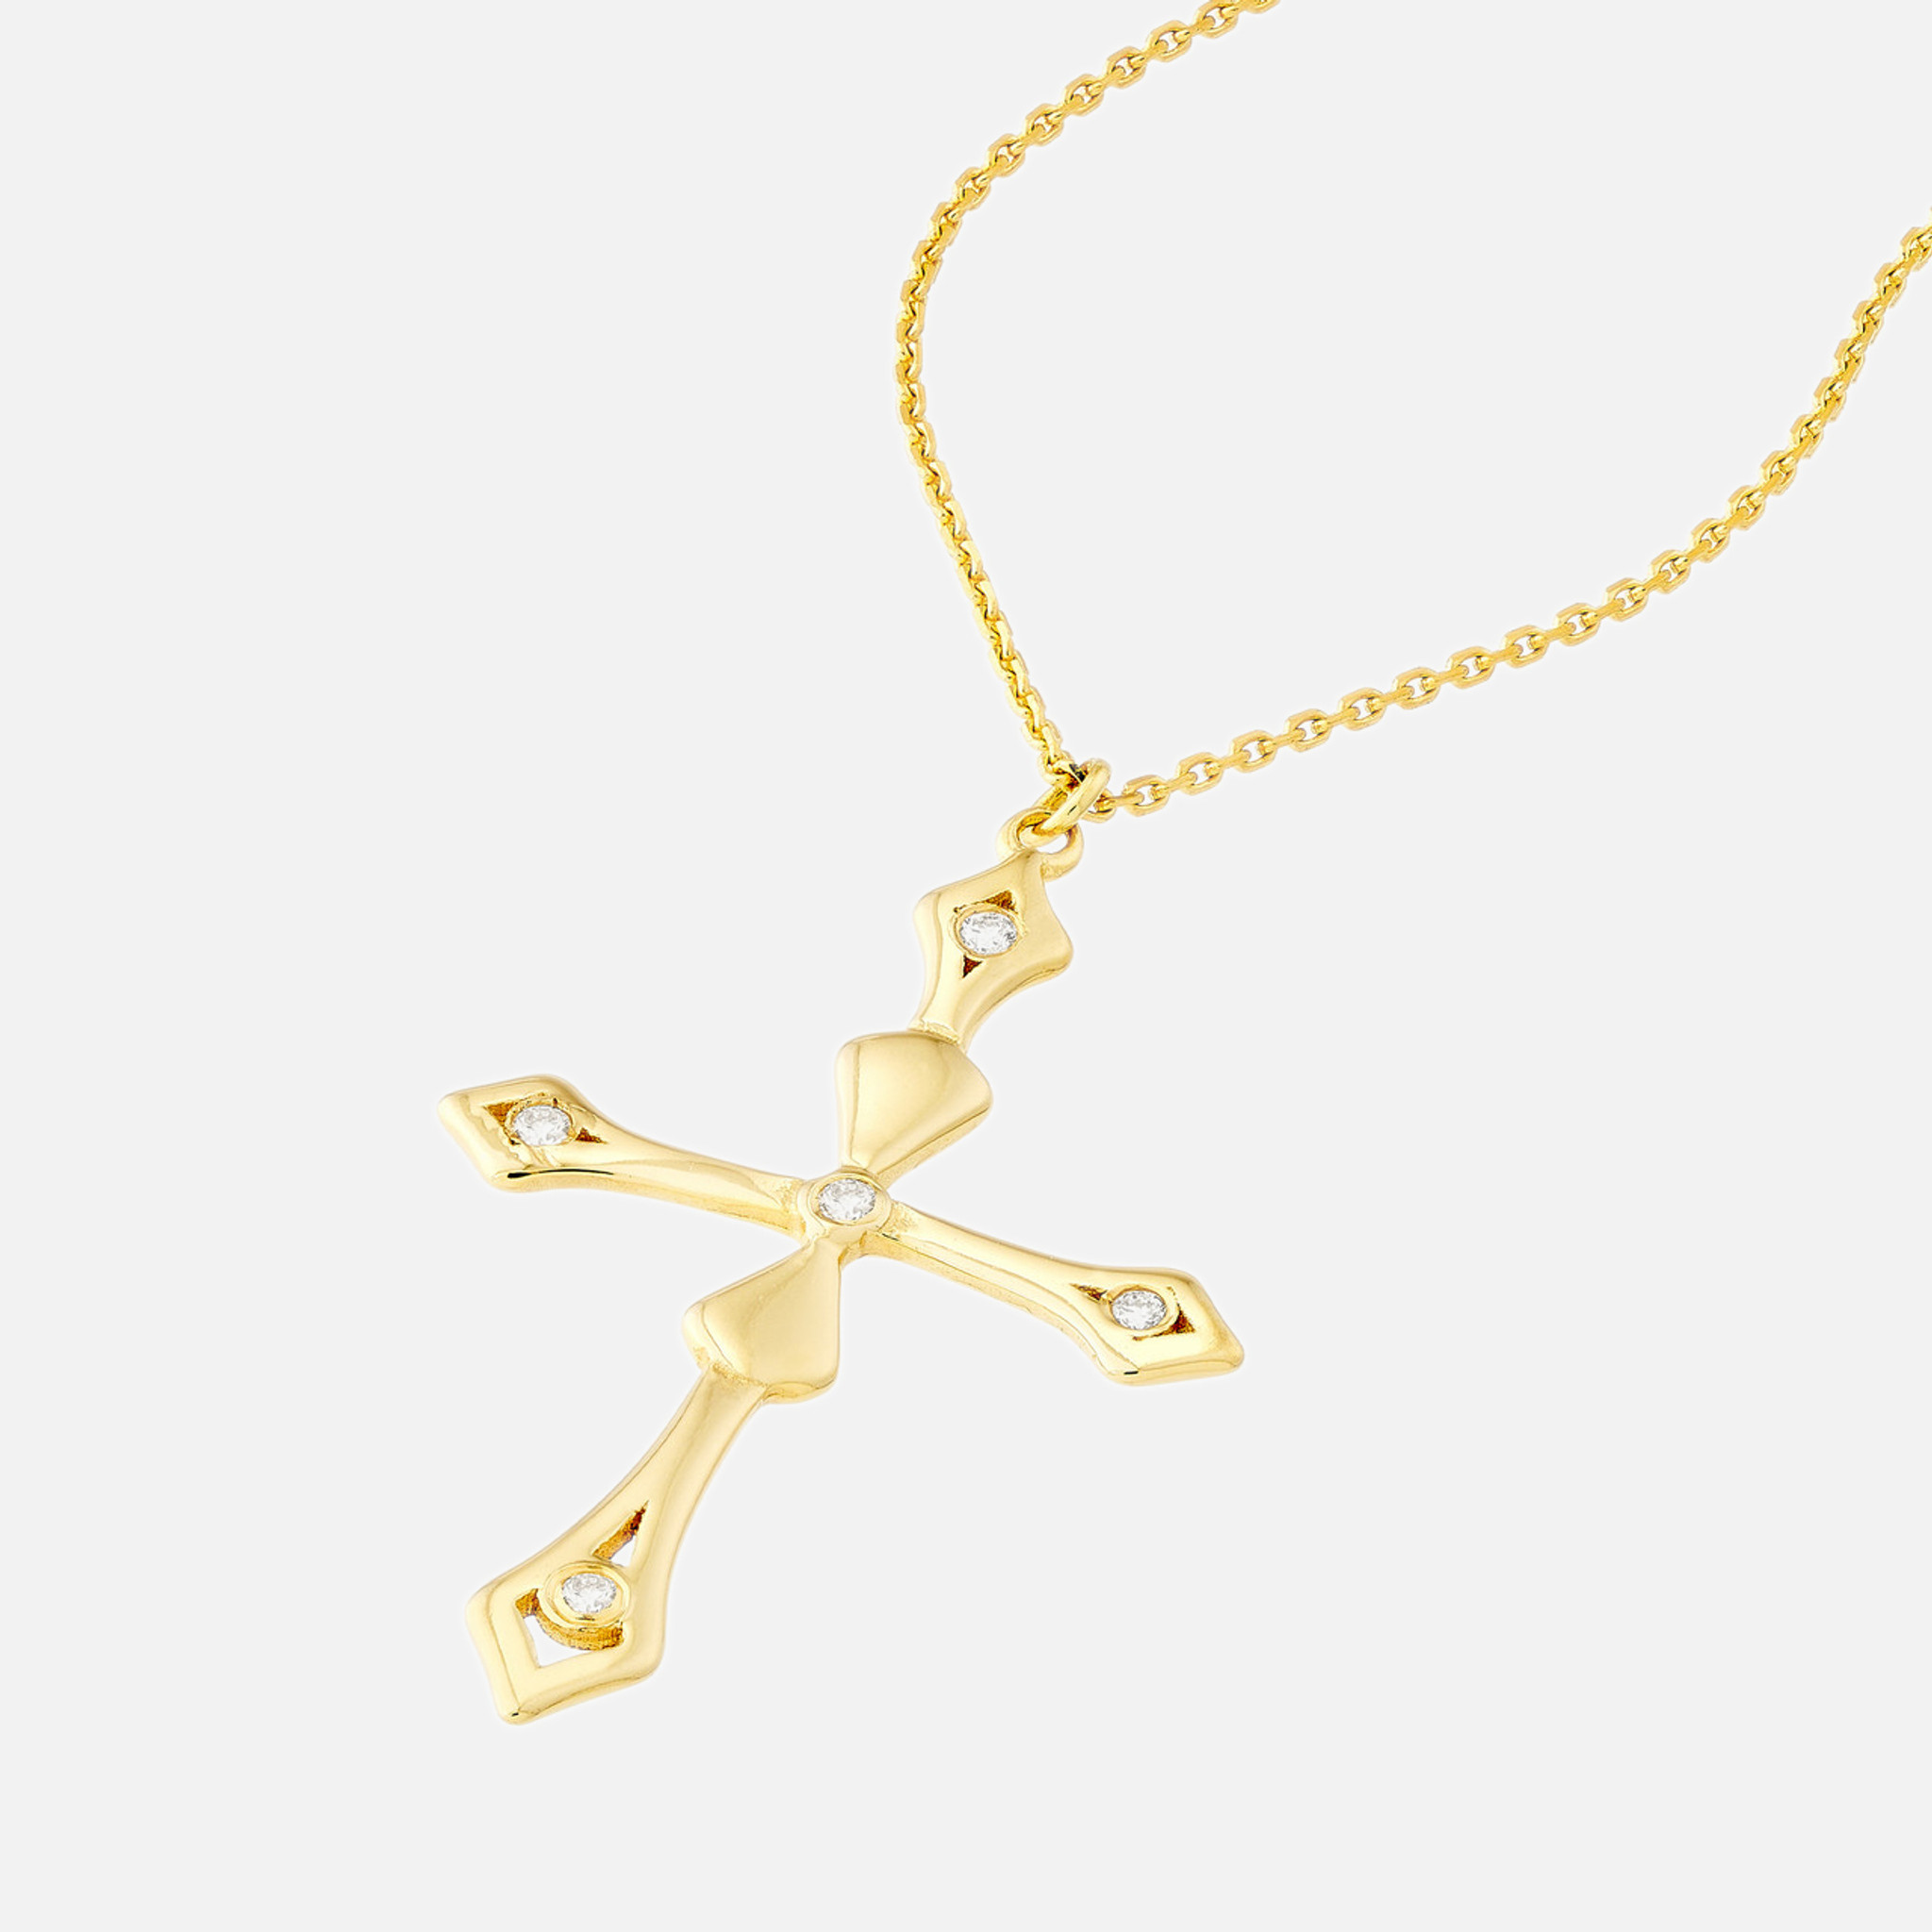 Close-up view of 14k gold diamond cross pendant necklace featuring four dainty white diamonds and a sculptural cross on a bold cable chain.